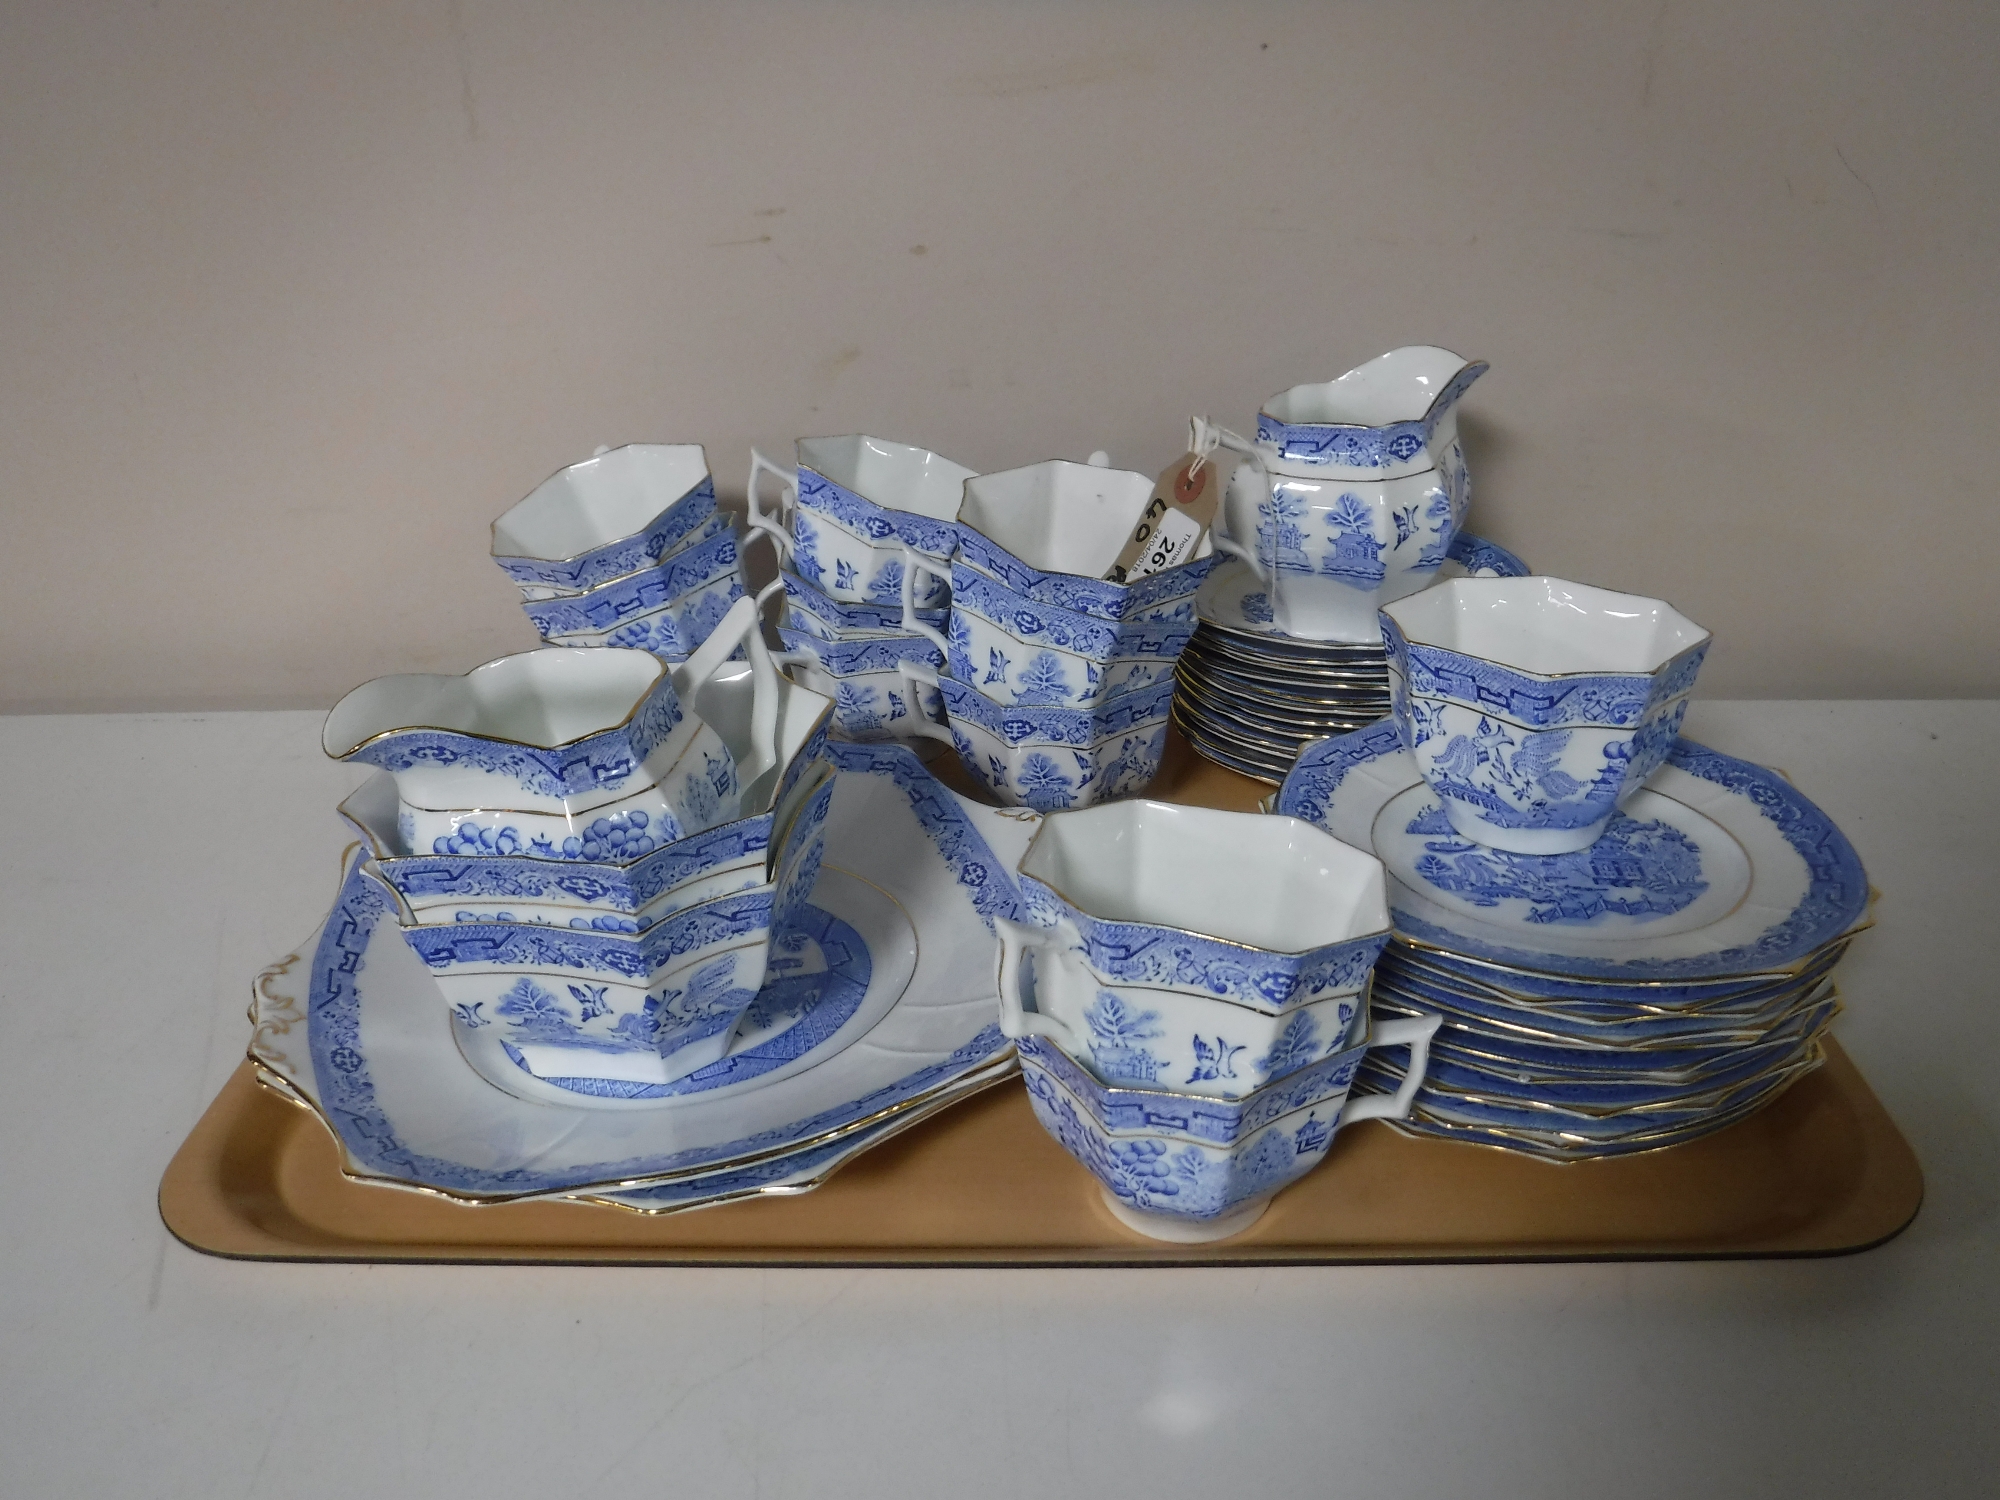 Forty two pieces of blue and white gilt-rimmed Willow pattern hexagonal-shaped tea china (two